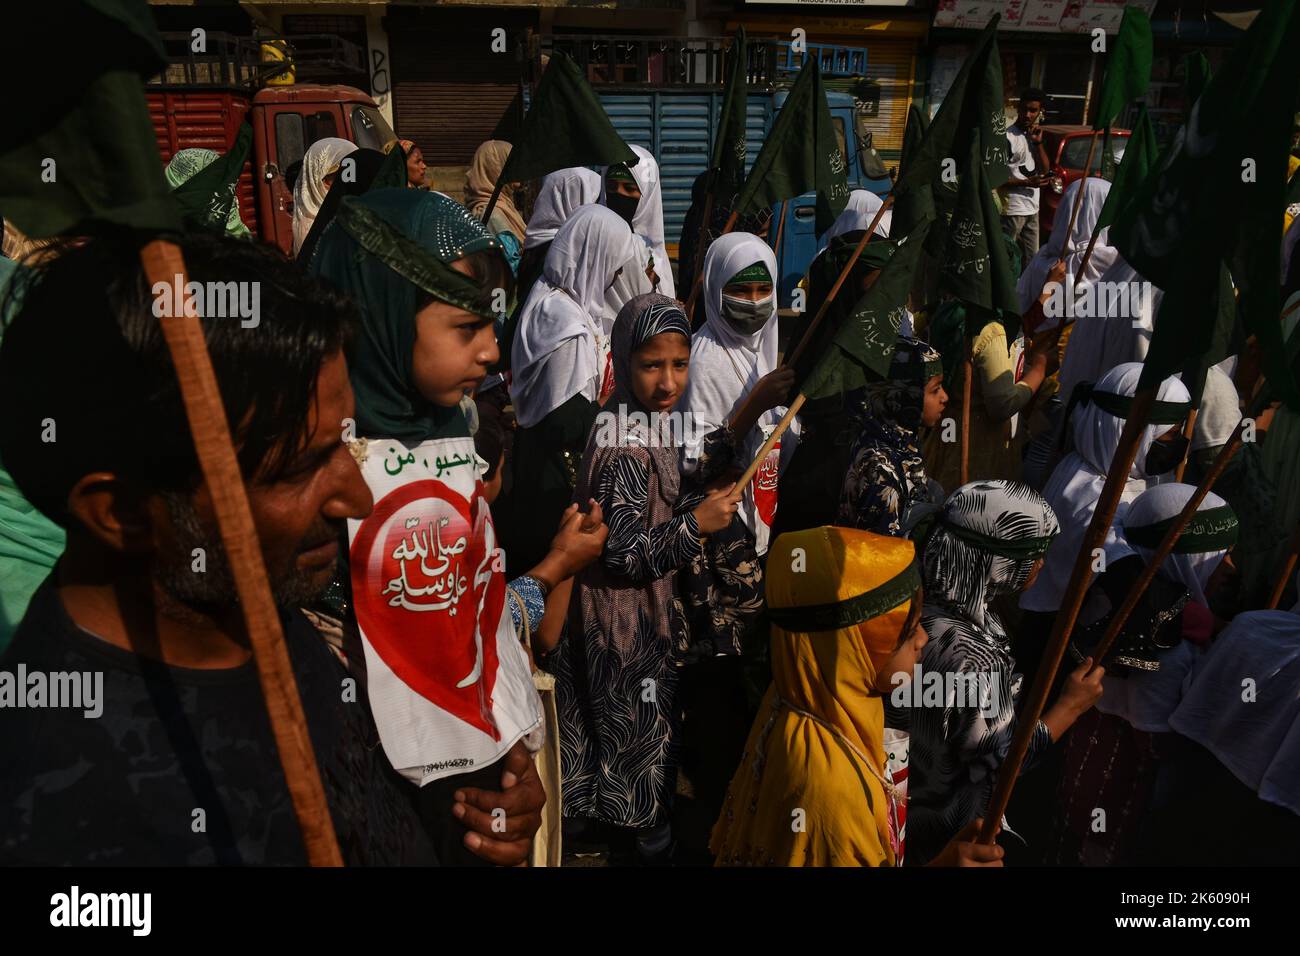 Srinagar, Jammu And Kashmir, India. 9th Oct, 2022. Small Kashmiri Muslim children taking part in Eid Milad-un-Nabi procession in the main city of Srinagar district on 09 October 2022. Eid-e-Milad, also called Maulid or Mawlid, is celebrated by singing hymns in praise of the Prophet. The Sunnis and the Shia sects celebrate the day differently. While the former holds prayers throughout the month and not mark the day as one of mourning, the latter believes that Prophet Muhammad chose Hazrat Ali as his successor on this day.Edi-e-Milad is celebrated in most Muslim-dominated countries by organis Stock Photo